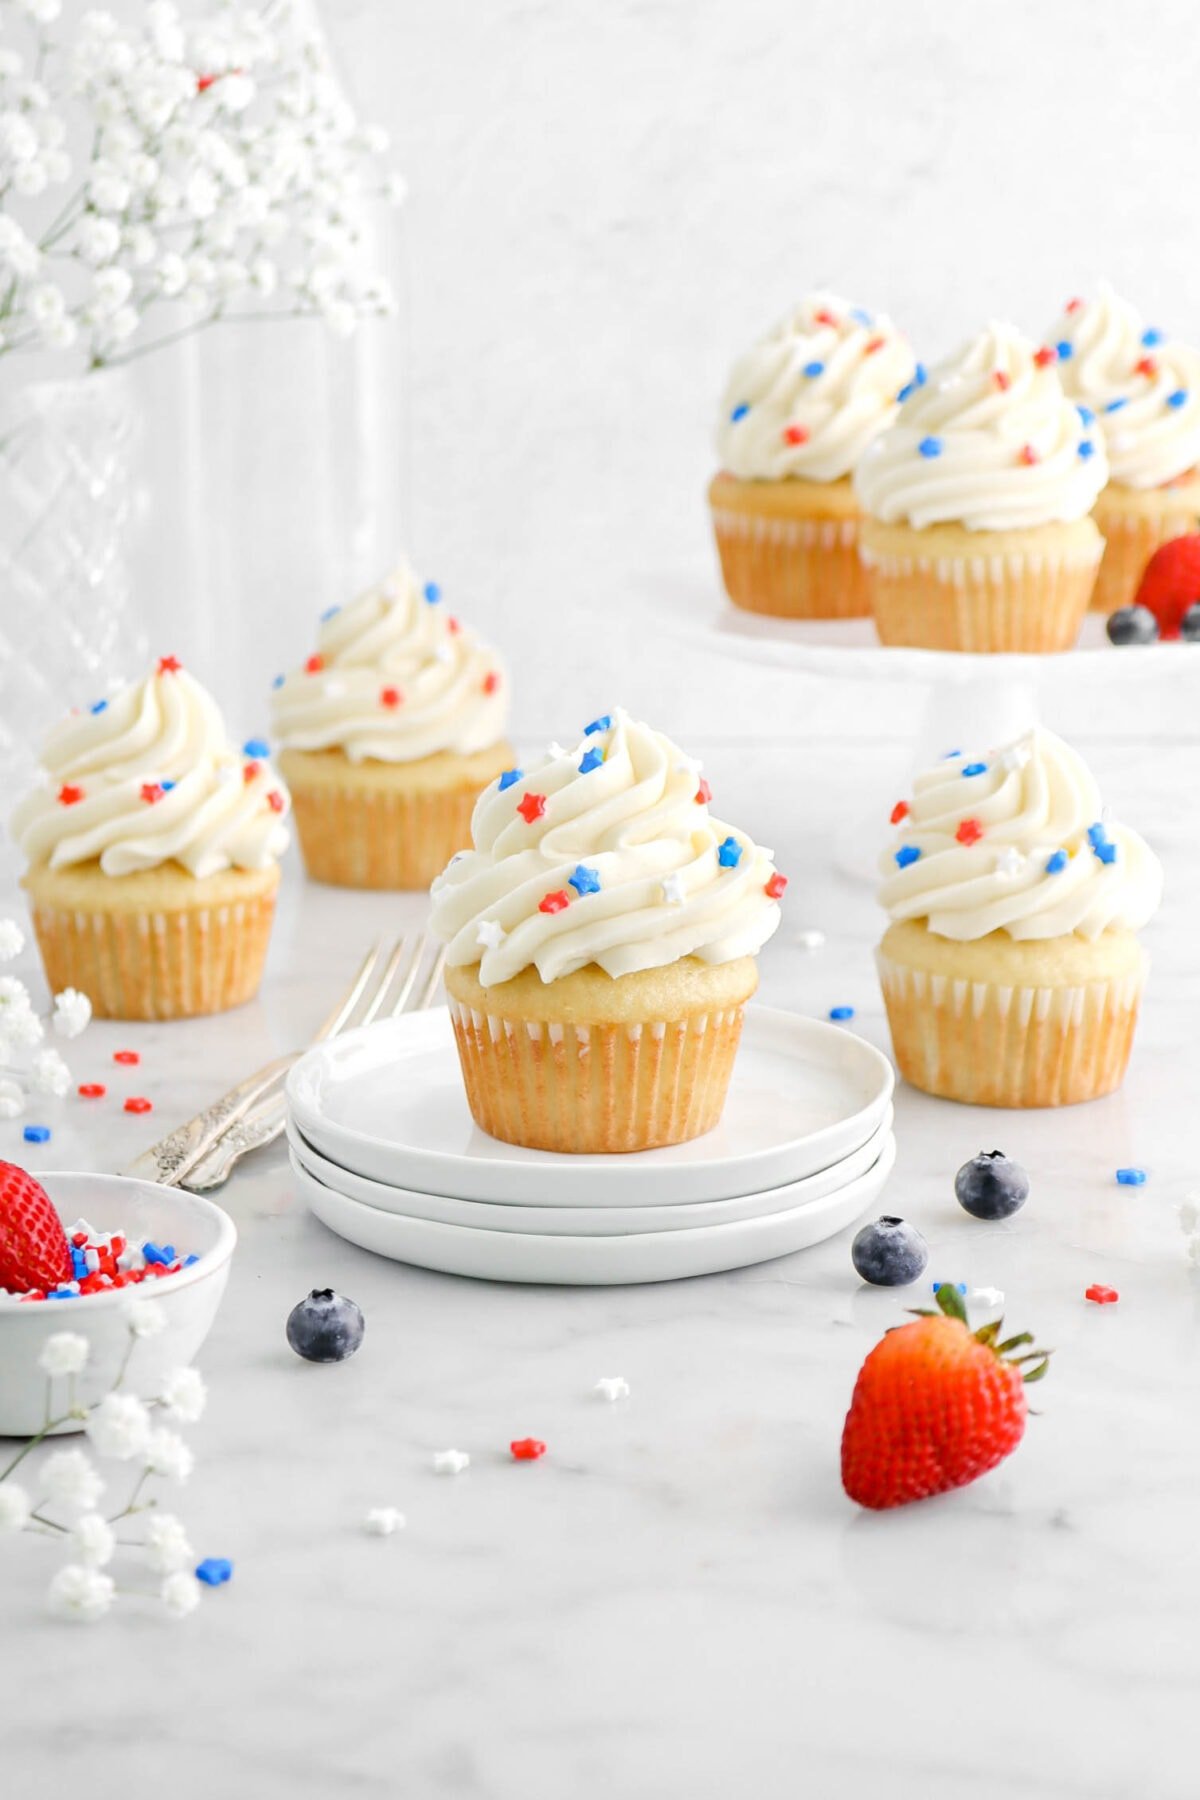 pulled back shot of seven vanilla cupcakes with frosting and red, white, and blue sprinkles on top, with two forks, sprinkles, and berries around.